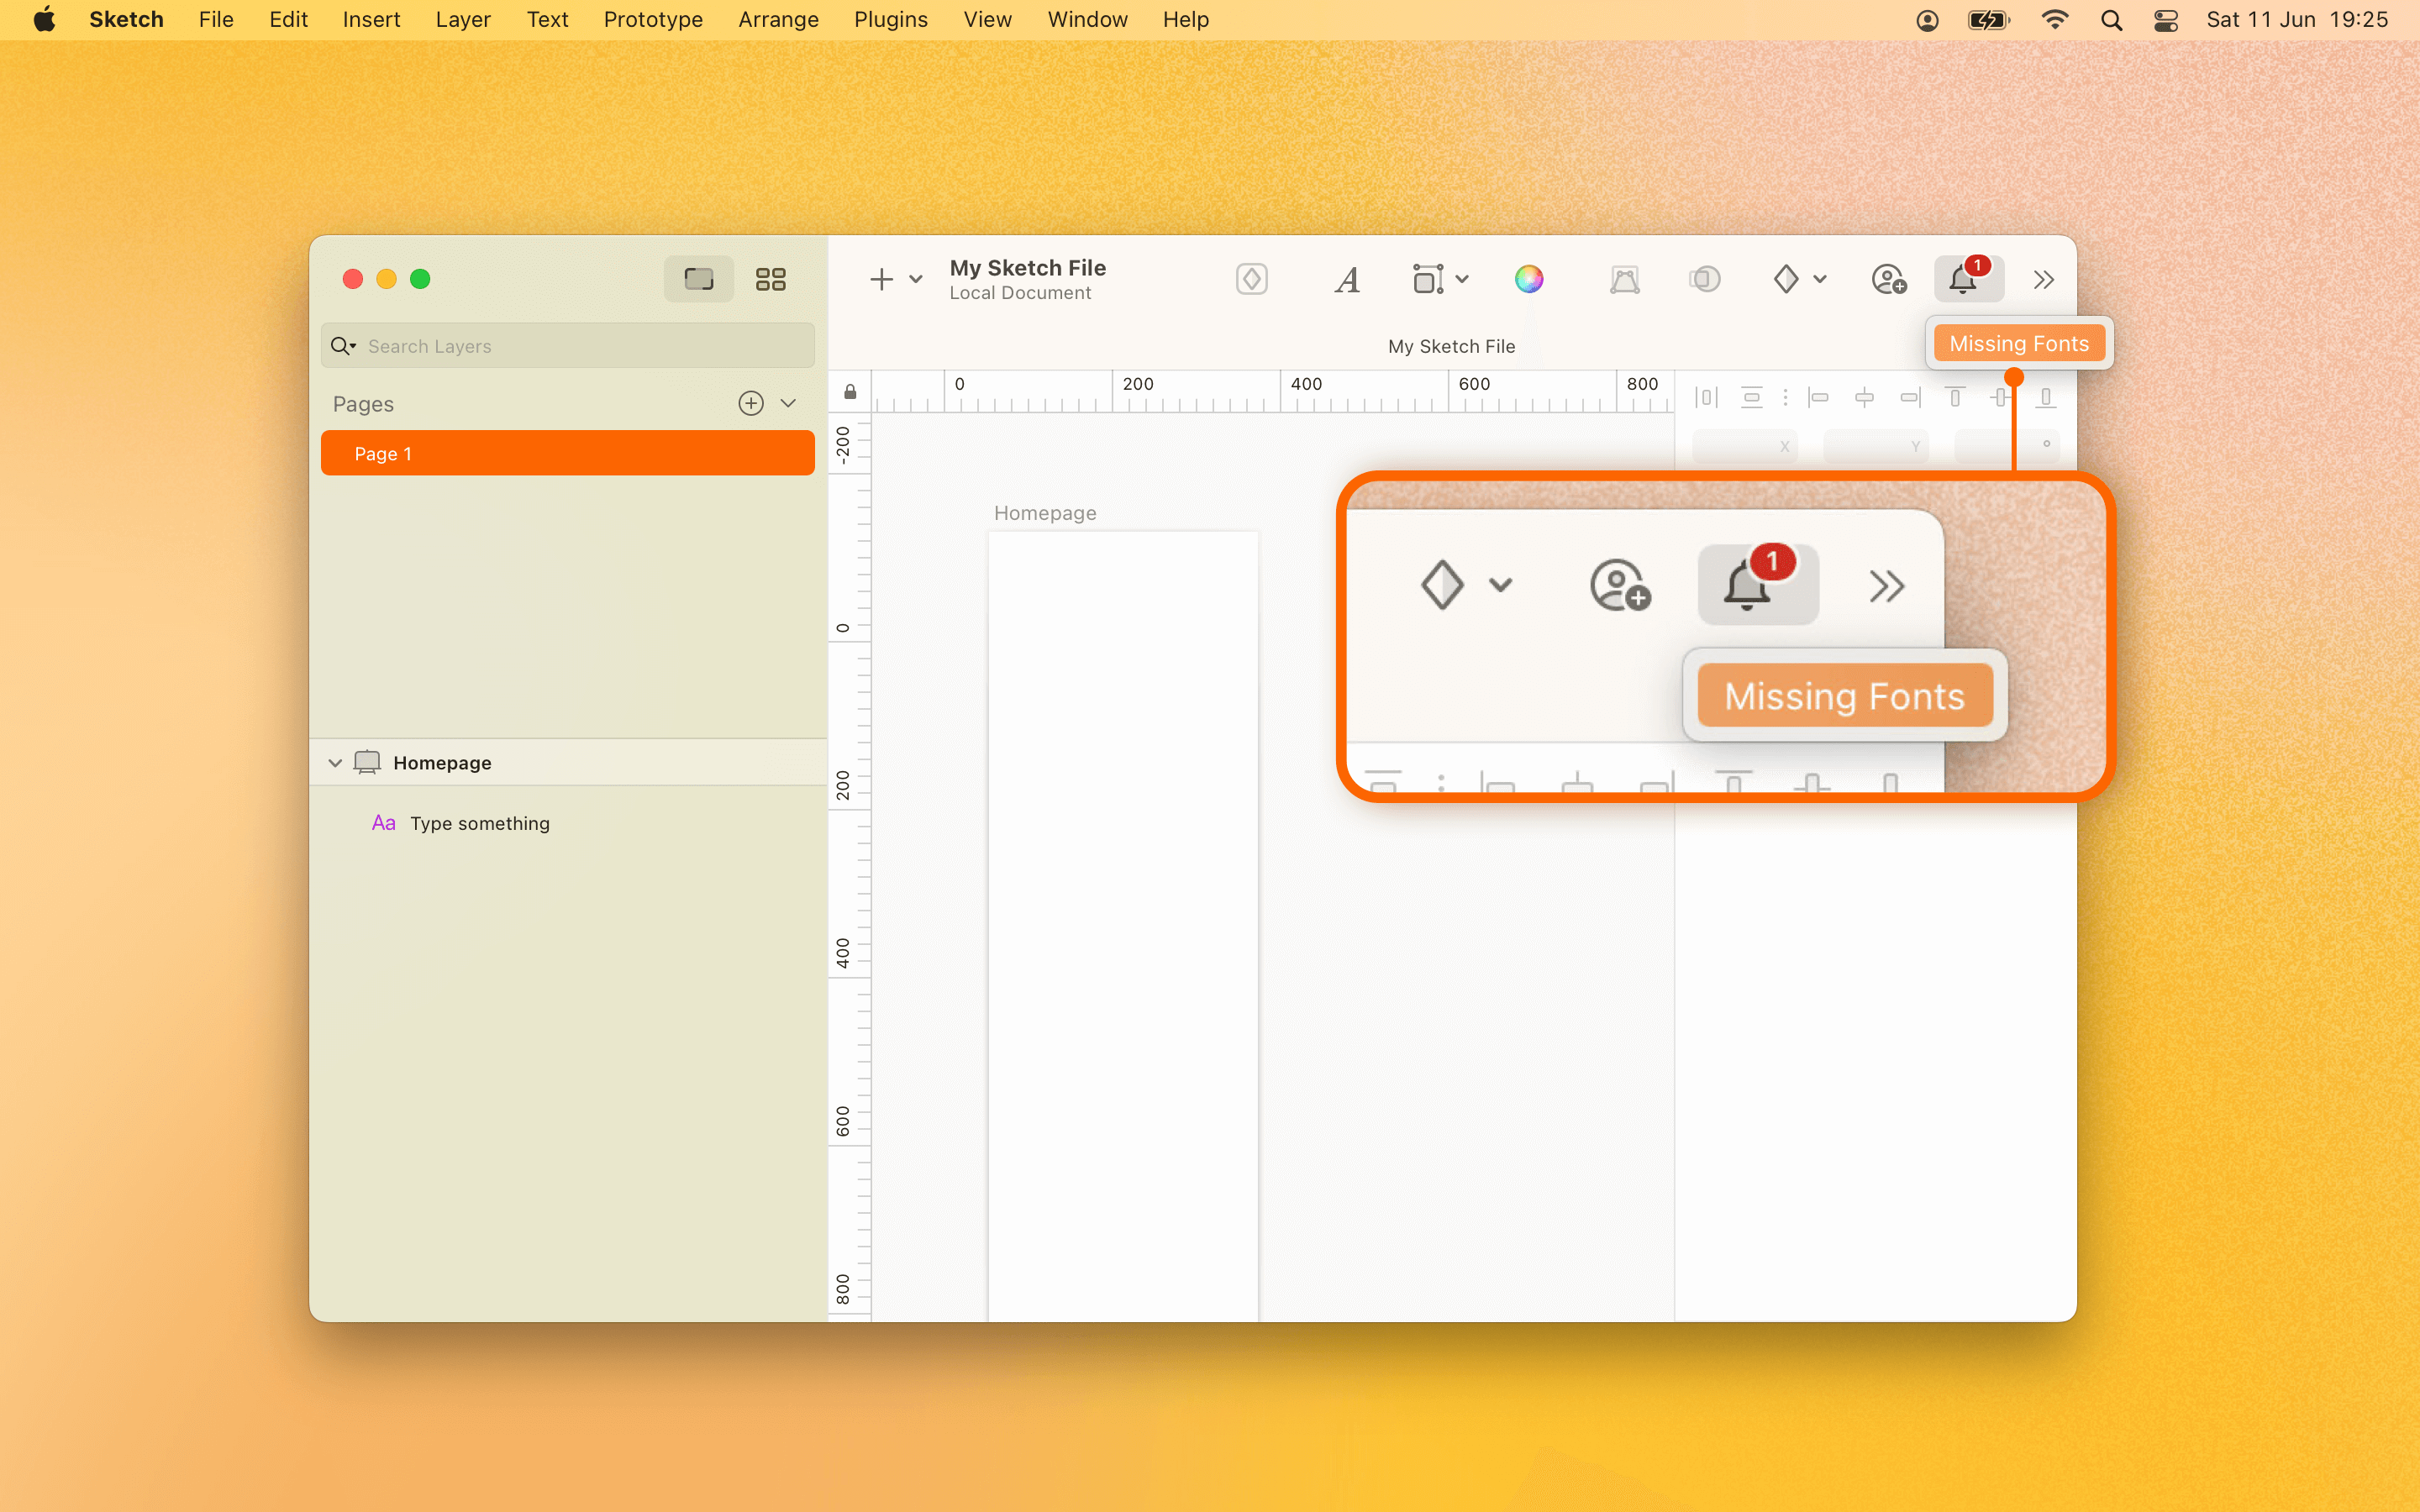 Missing font notification in the Mac app